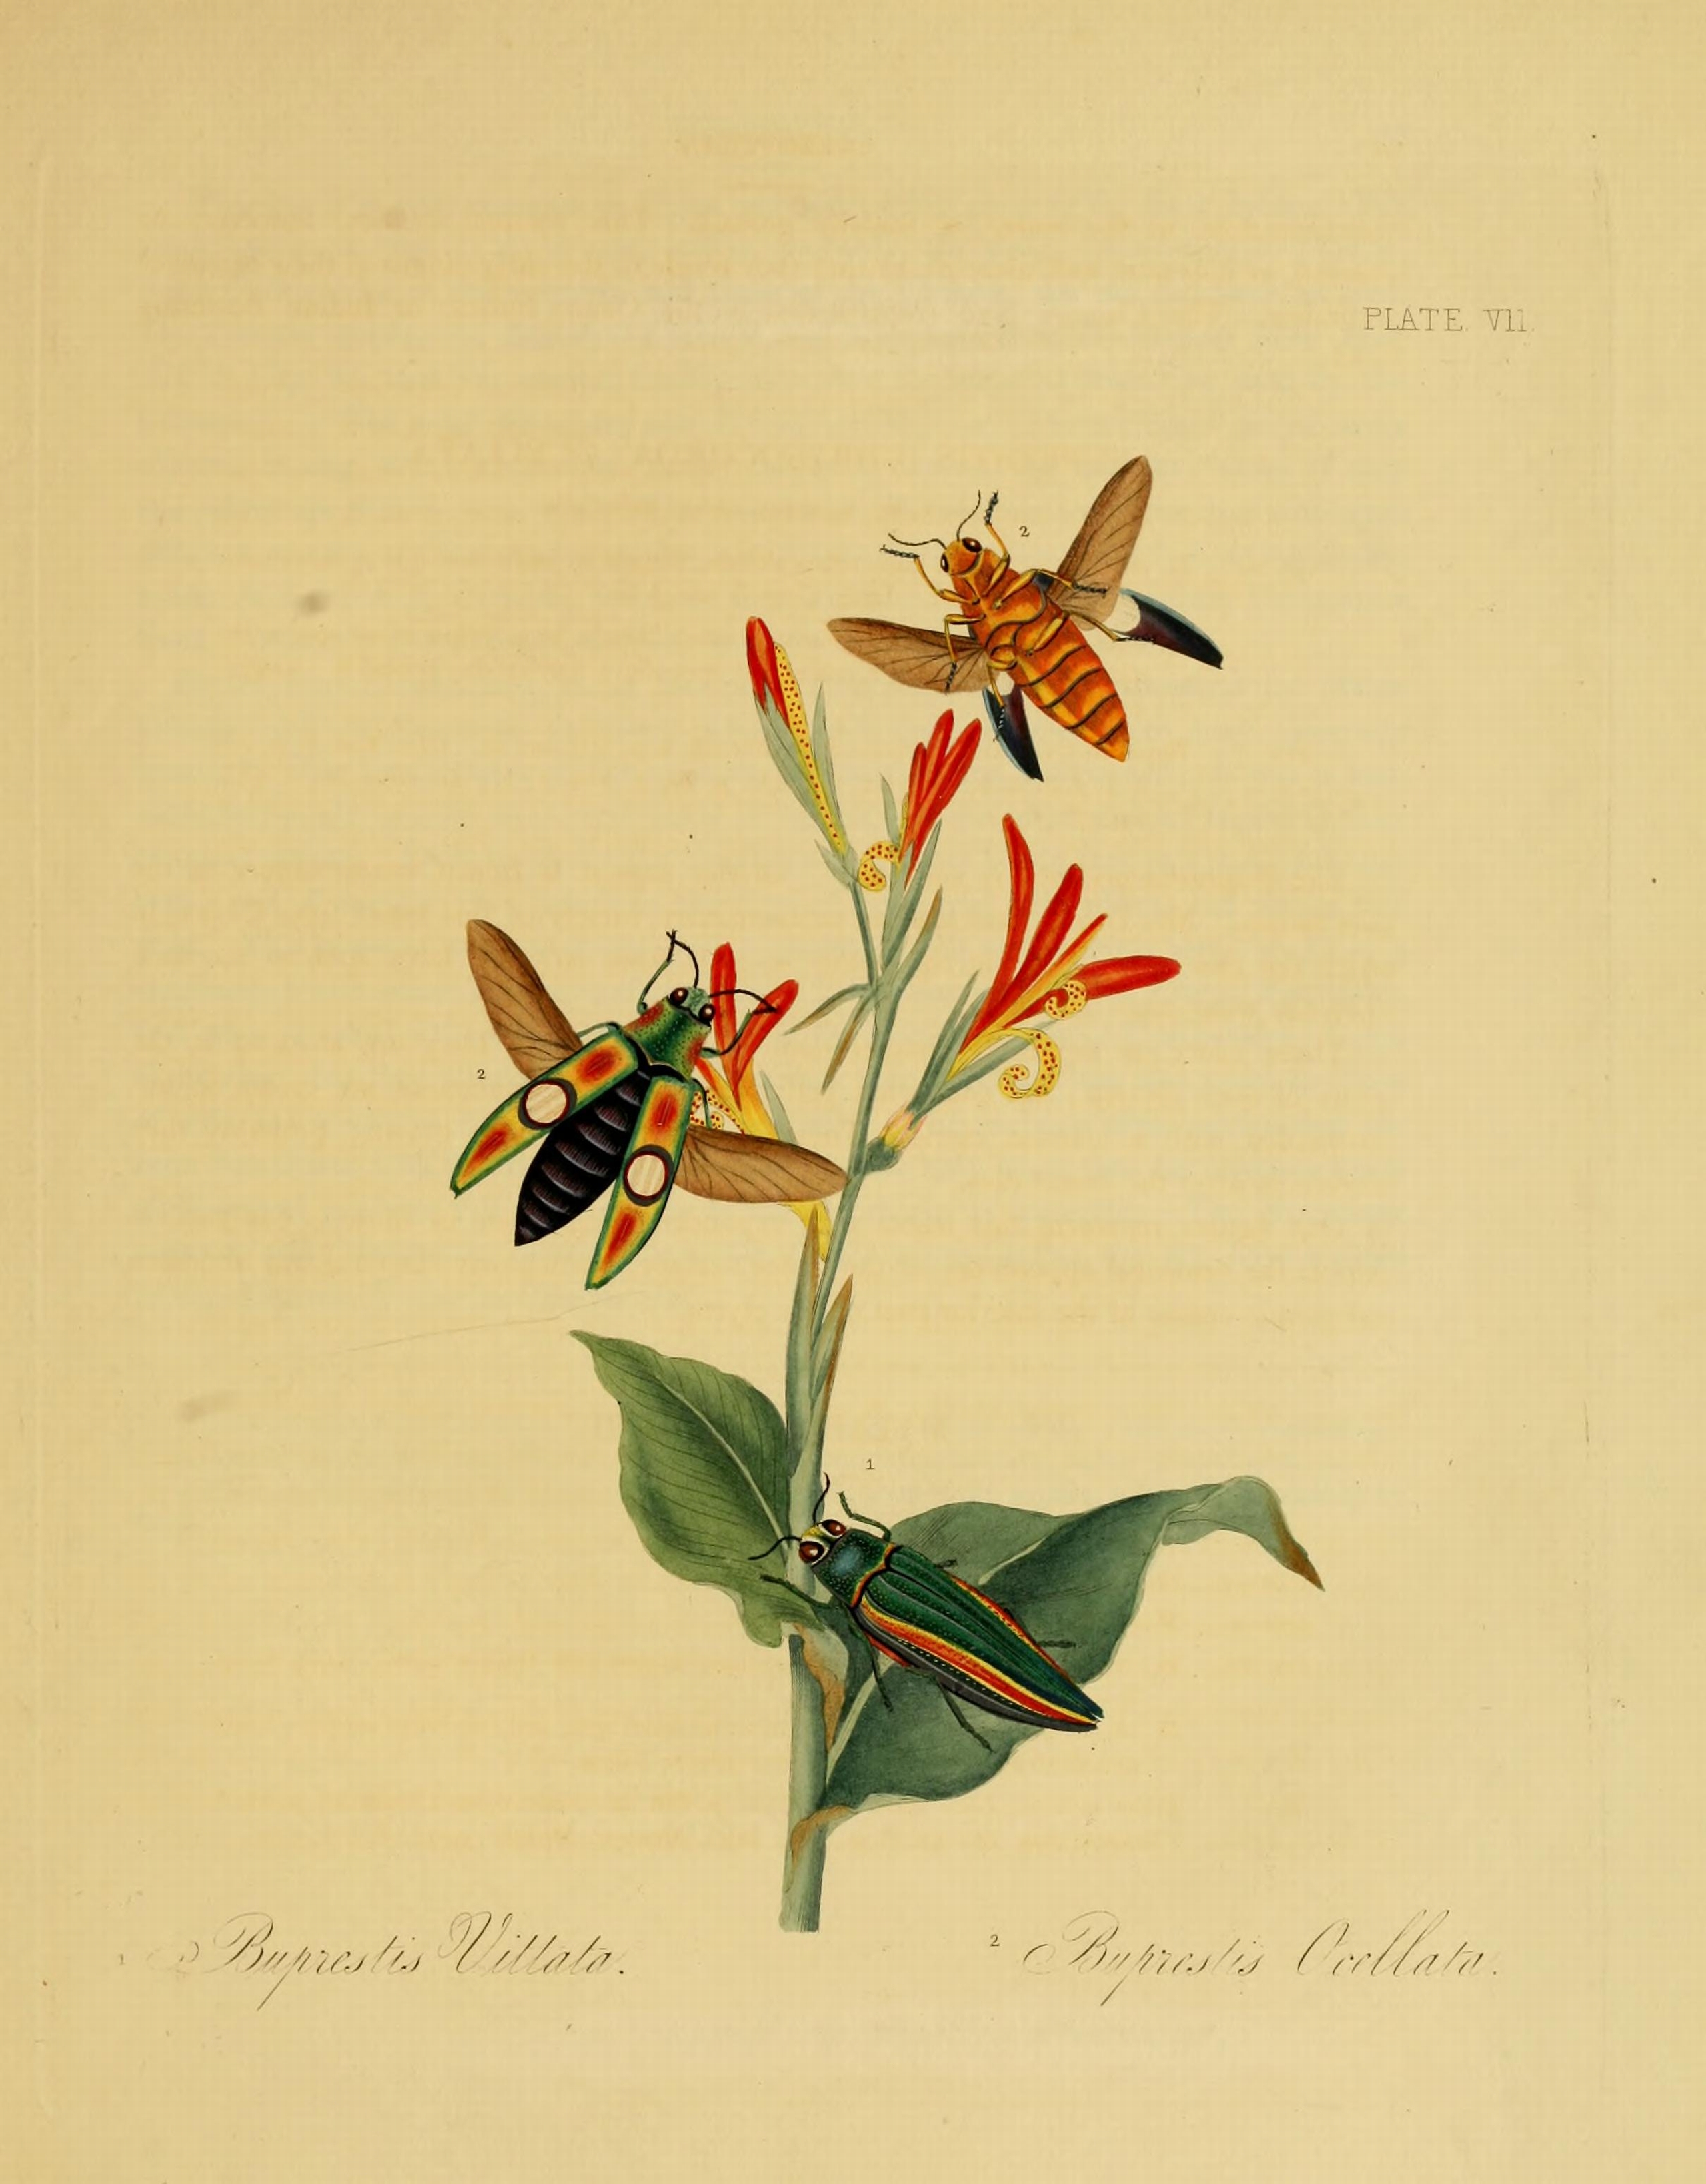 Donovan - Insects of China, 1838 - pl 07